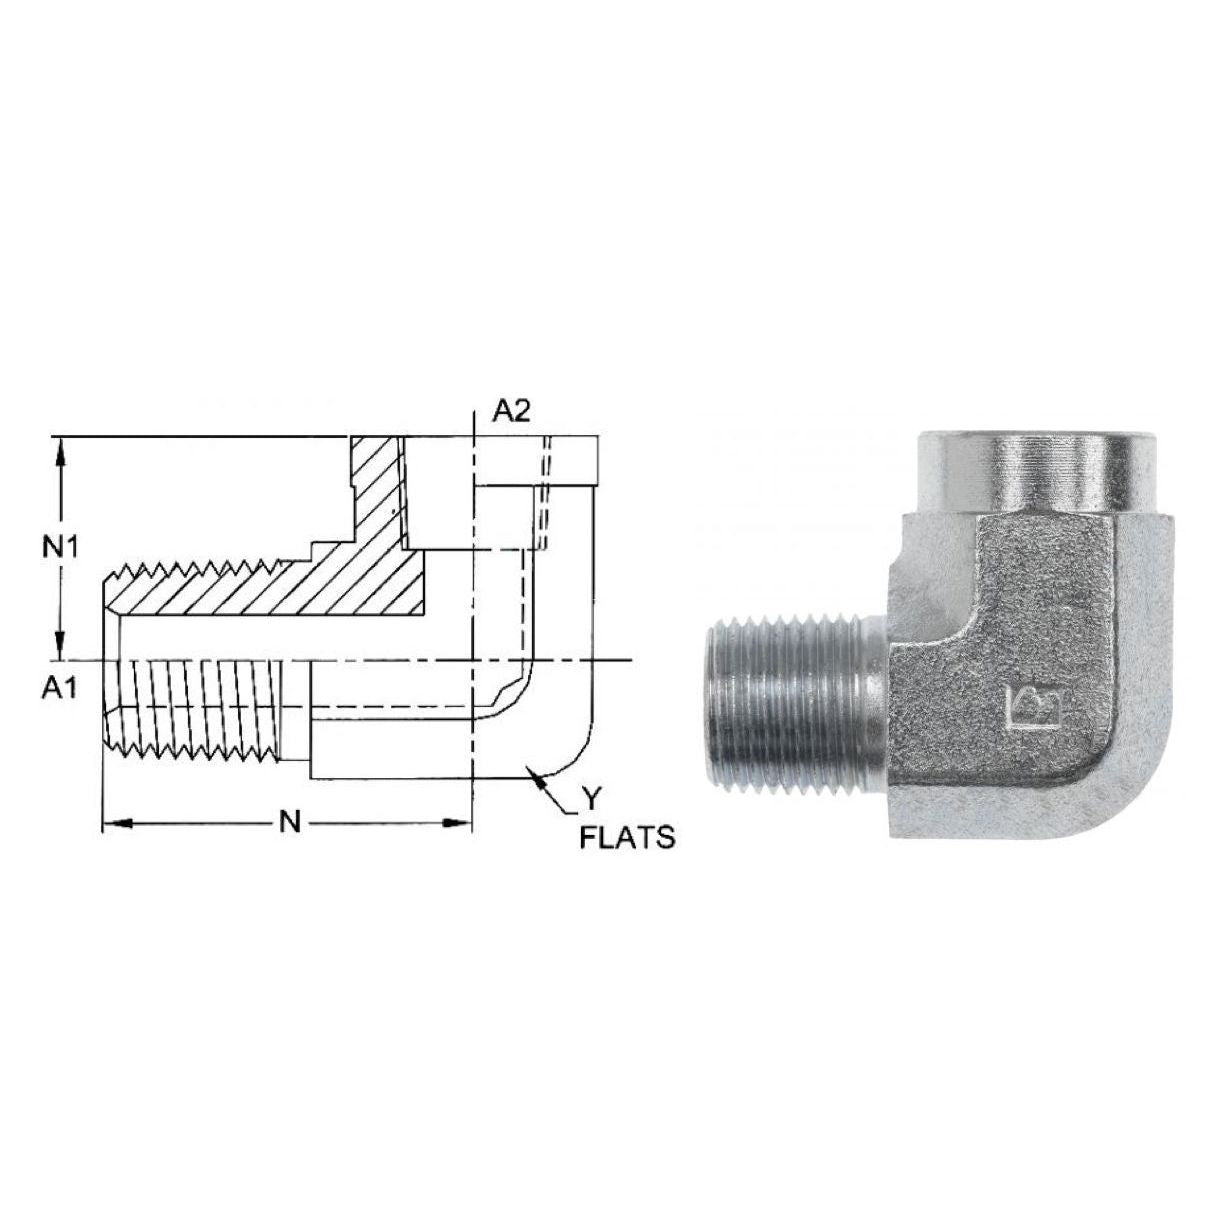 5502-16-16-SS : OneHydraulics 90-Degree Street Elbow, 1 Male NPT x 1 Female NPT, Stainless Steel, 3600psi